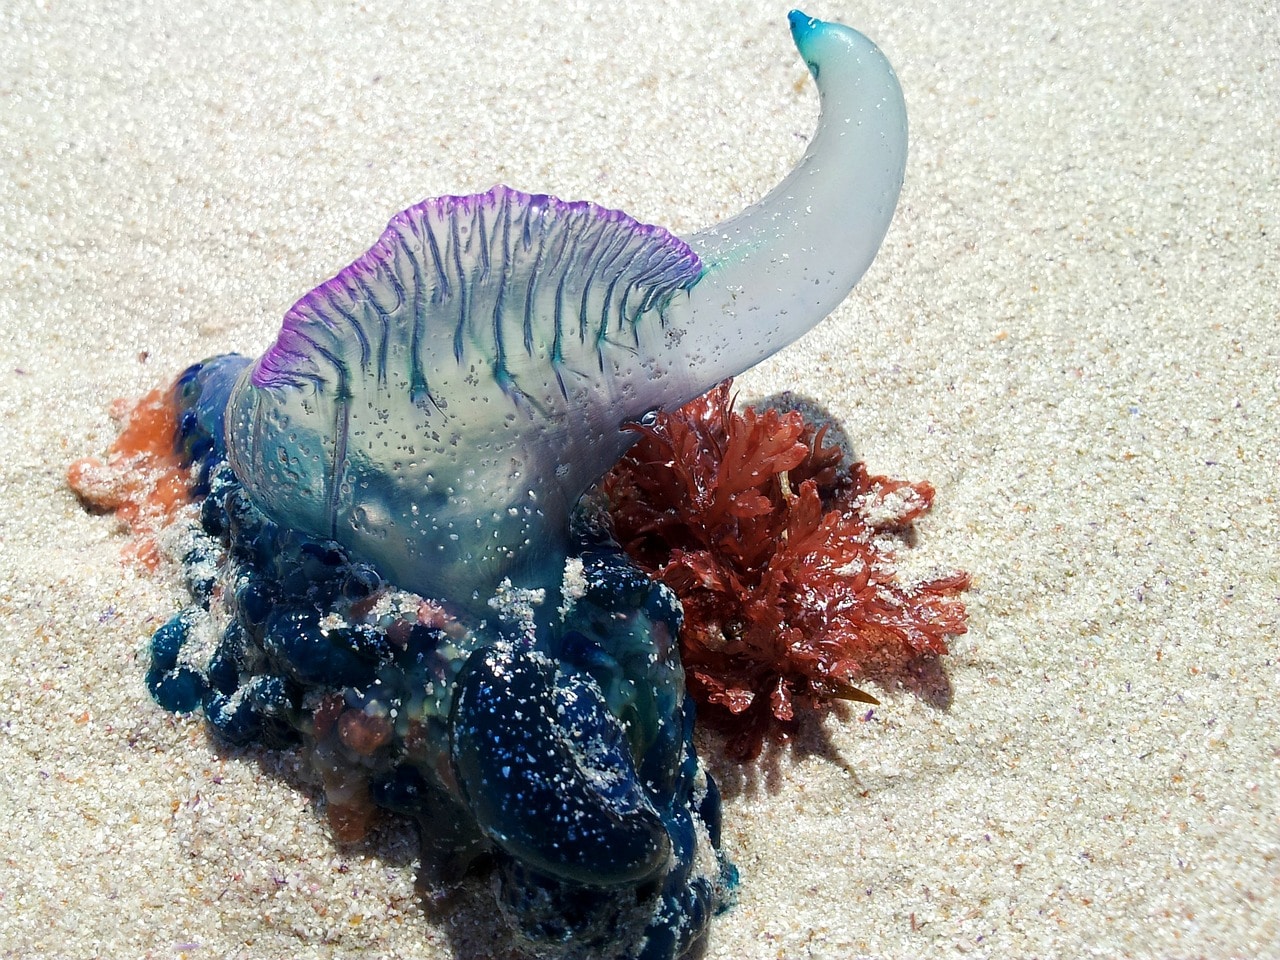 The Portuguese man-of-war